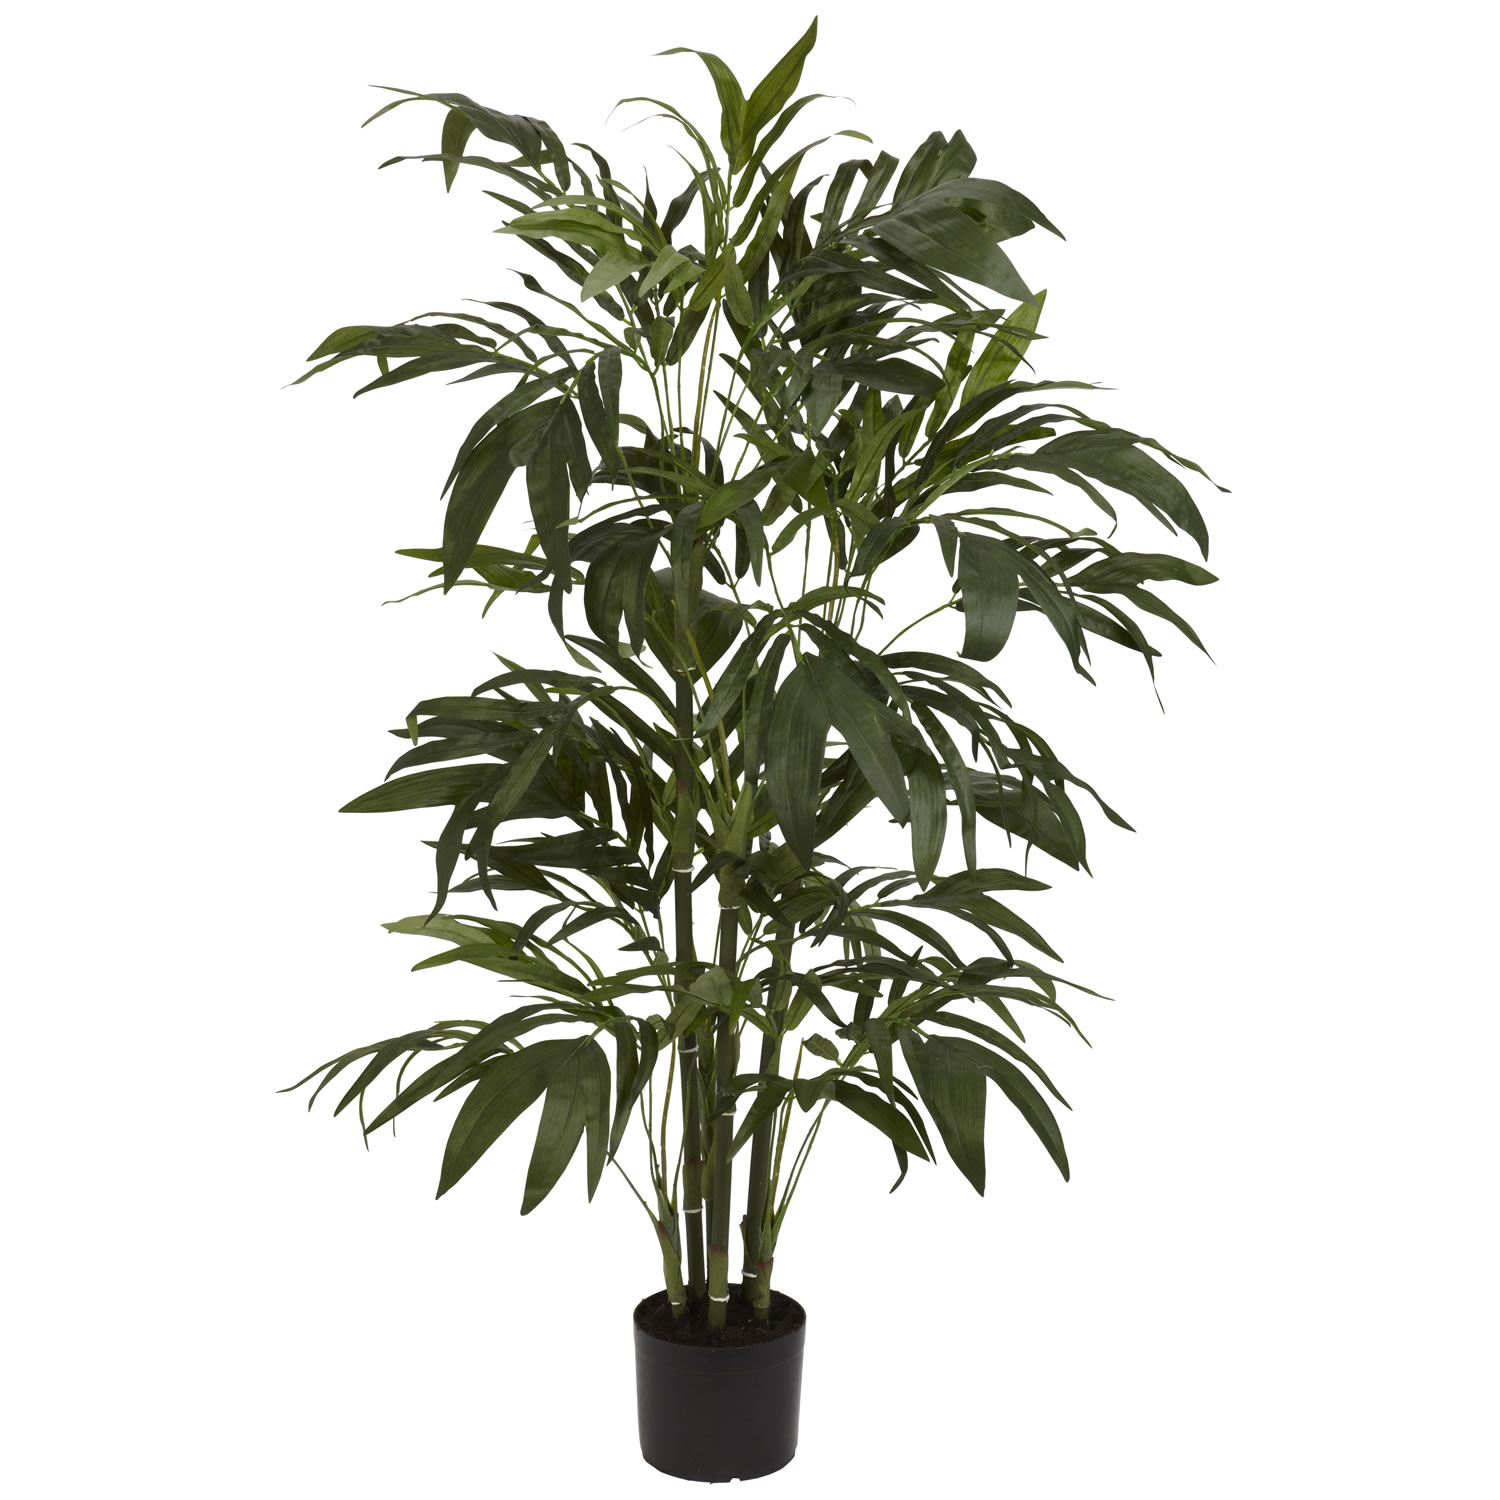 4 Foot Bamboo Palm Tree: Potted